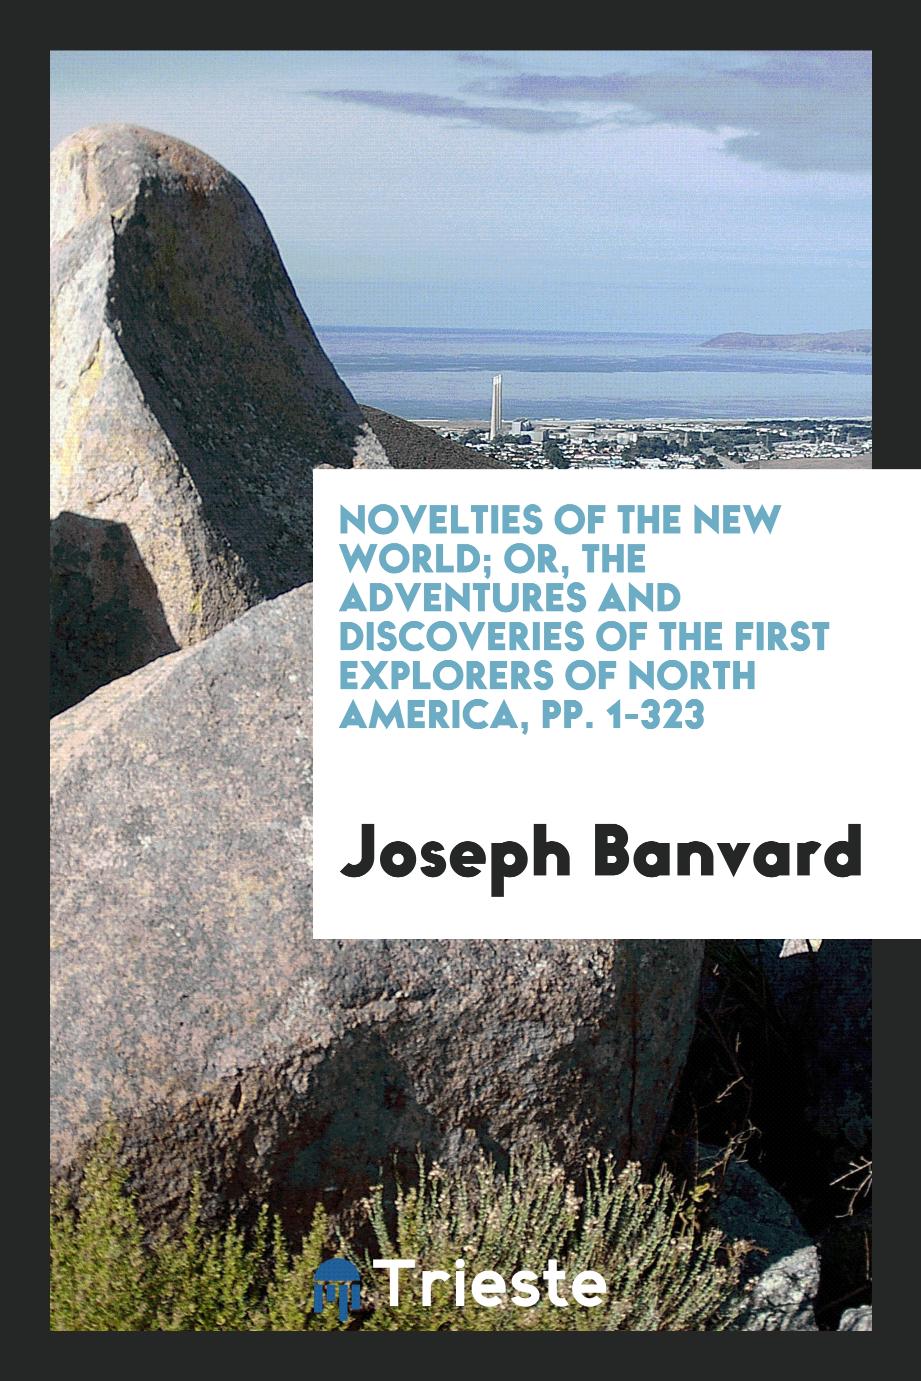 Novelties of the New World; Or, The Adventures and Discoveries of the First Explorers of North America, pp. 1-323